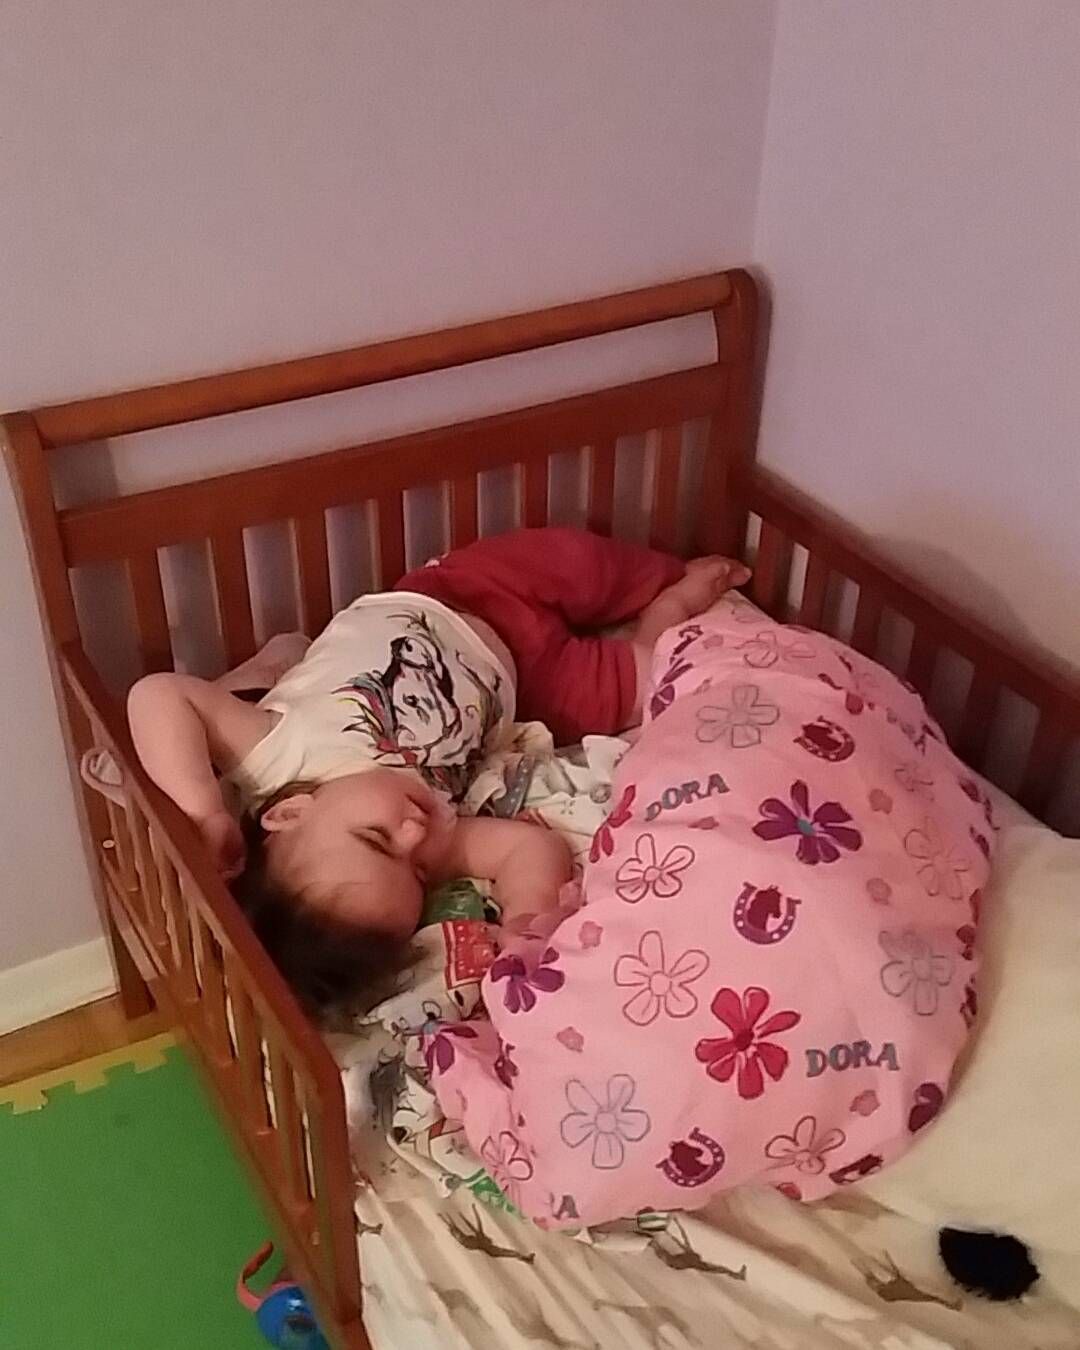 A child laying the wrong way on her bed